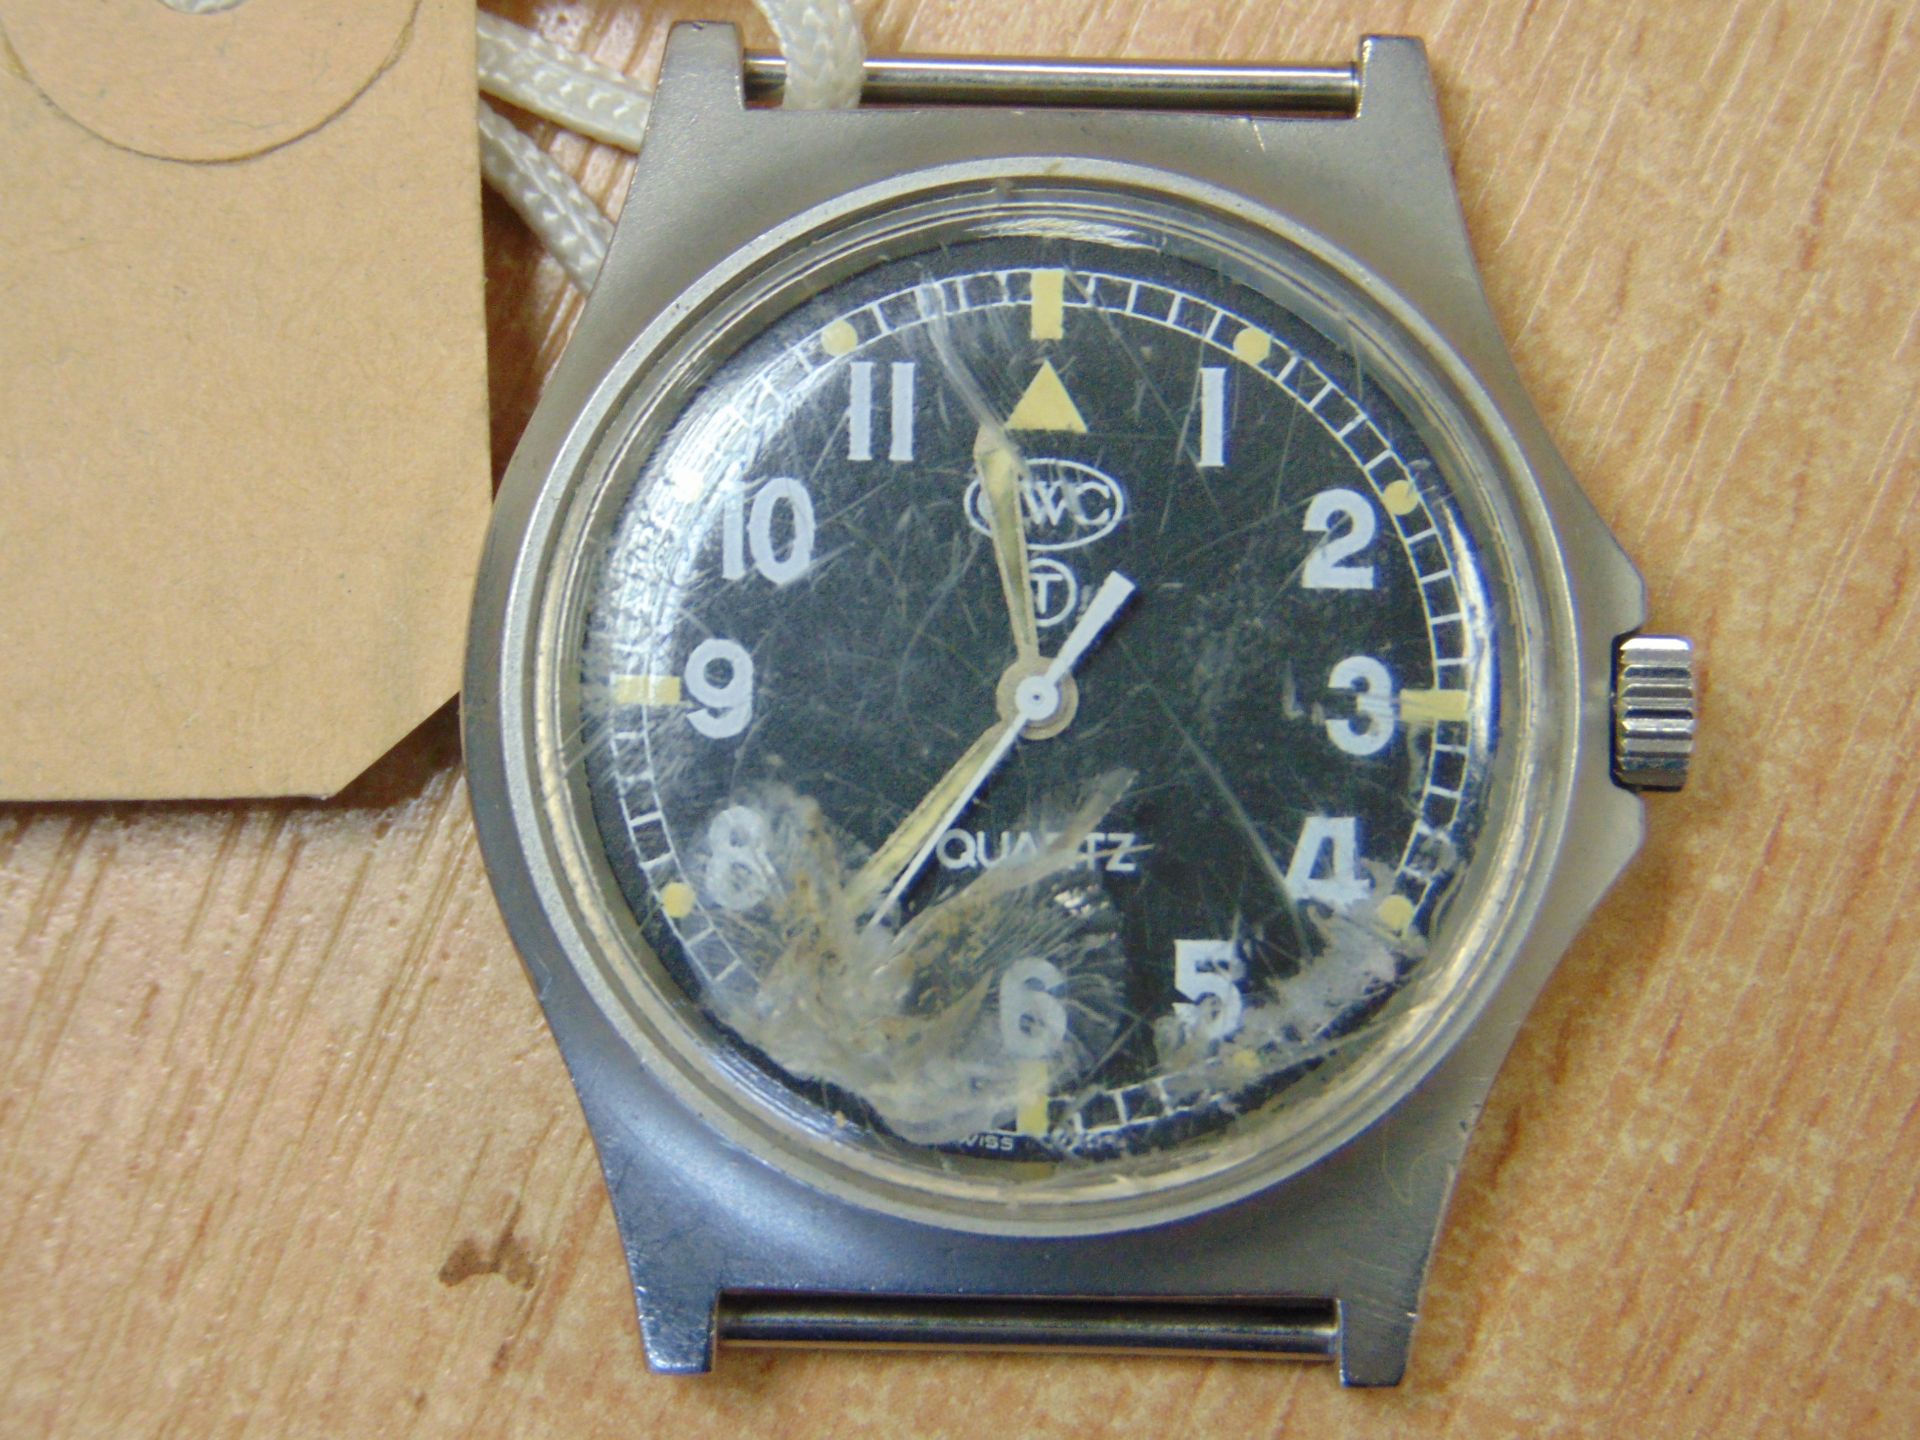 CWC W10 BRITISH ARMY SERVICE WATCH -WATER RESISTANT TO 5 ATM NATO MARKS DATE 2005 *CHIP IN GLASS* - Image 6 of 7